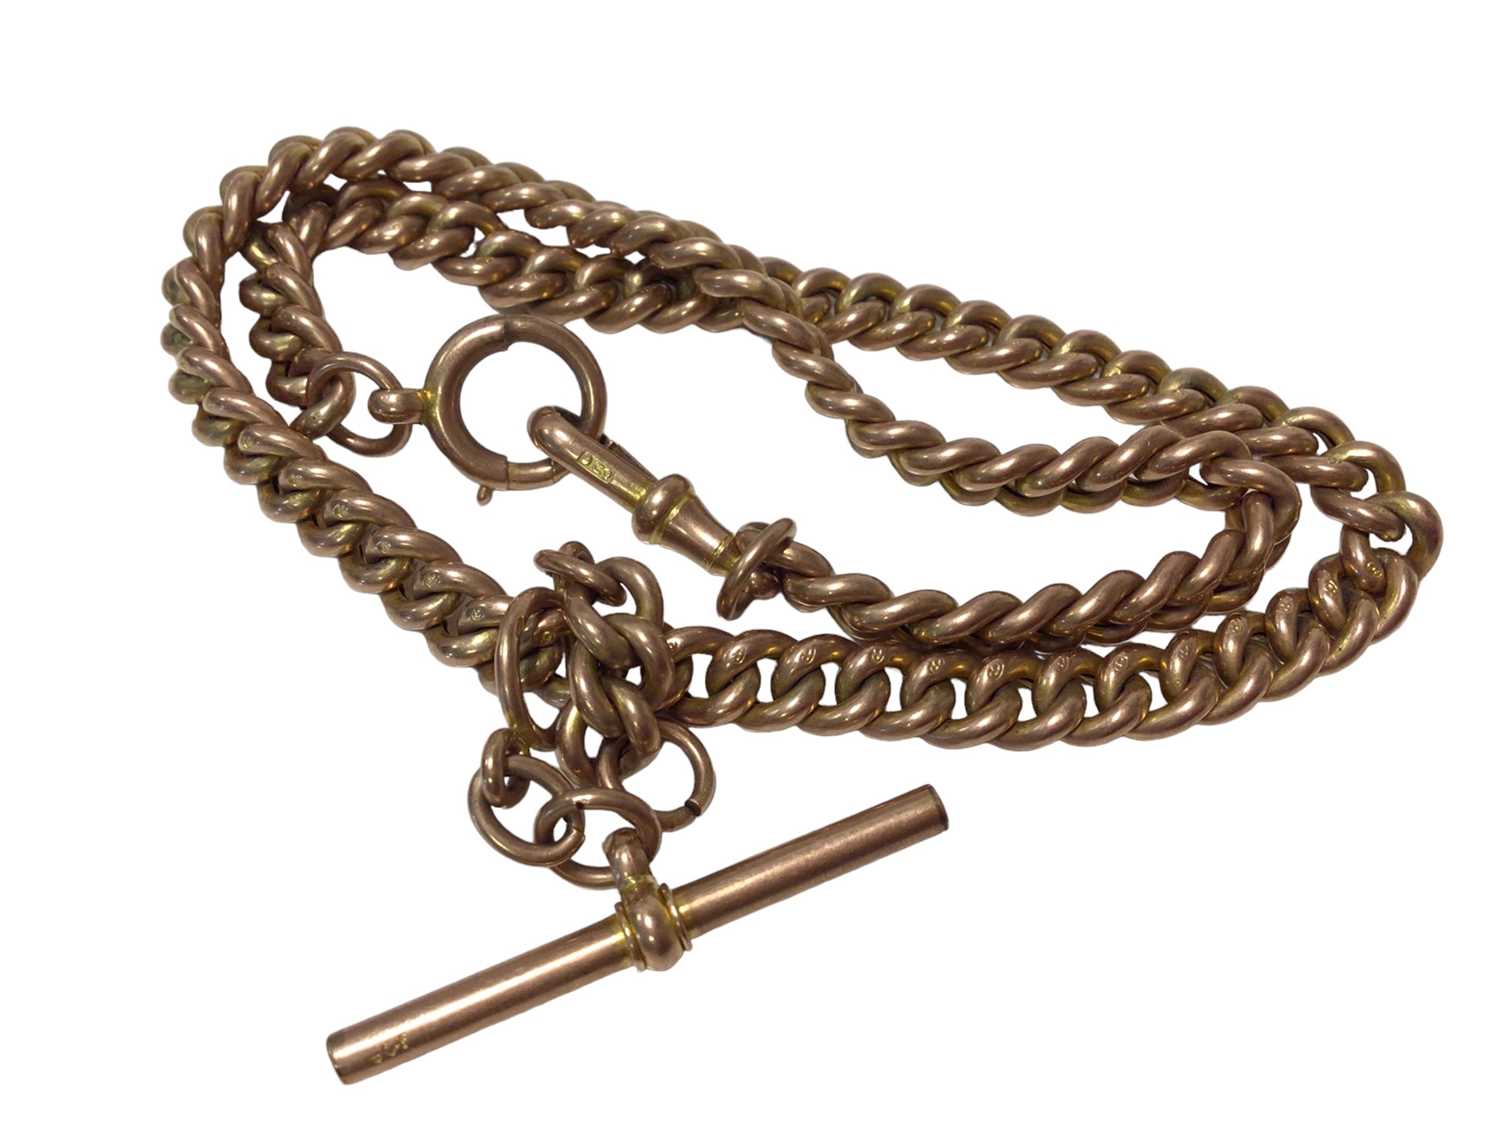 9ct gold fob watch chain - Image 2 of 2